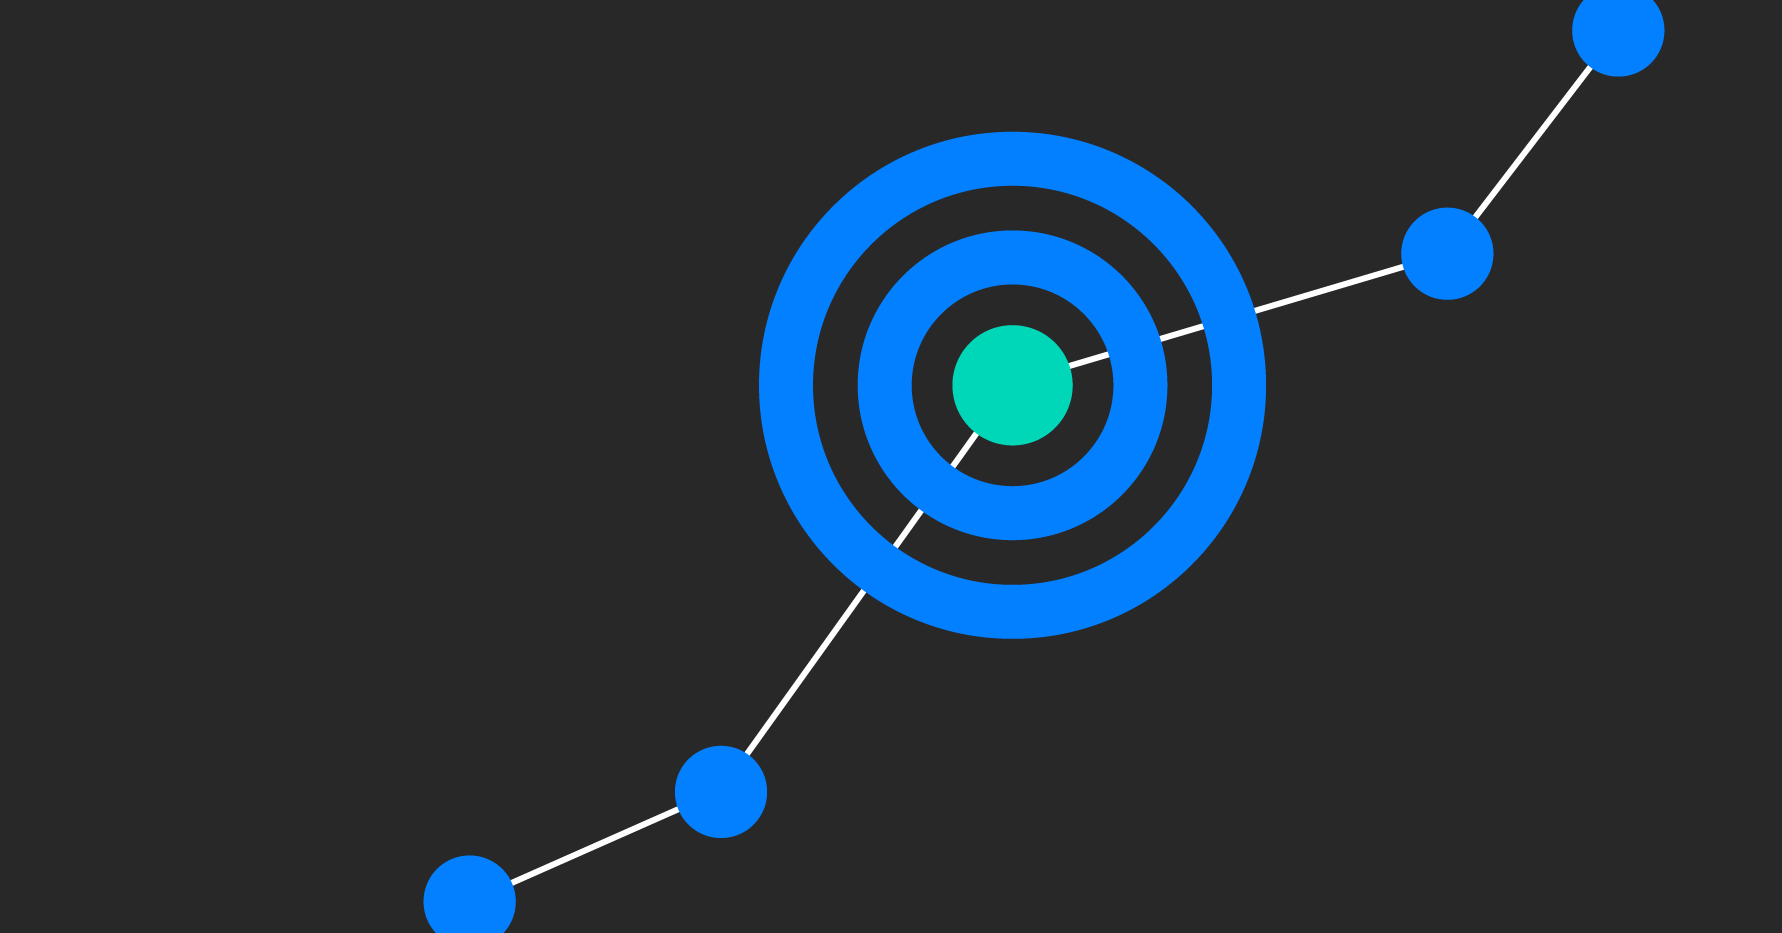 Stylized illustration of bullseye overlapping a line graph